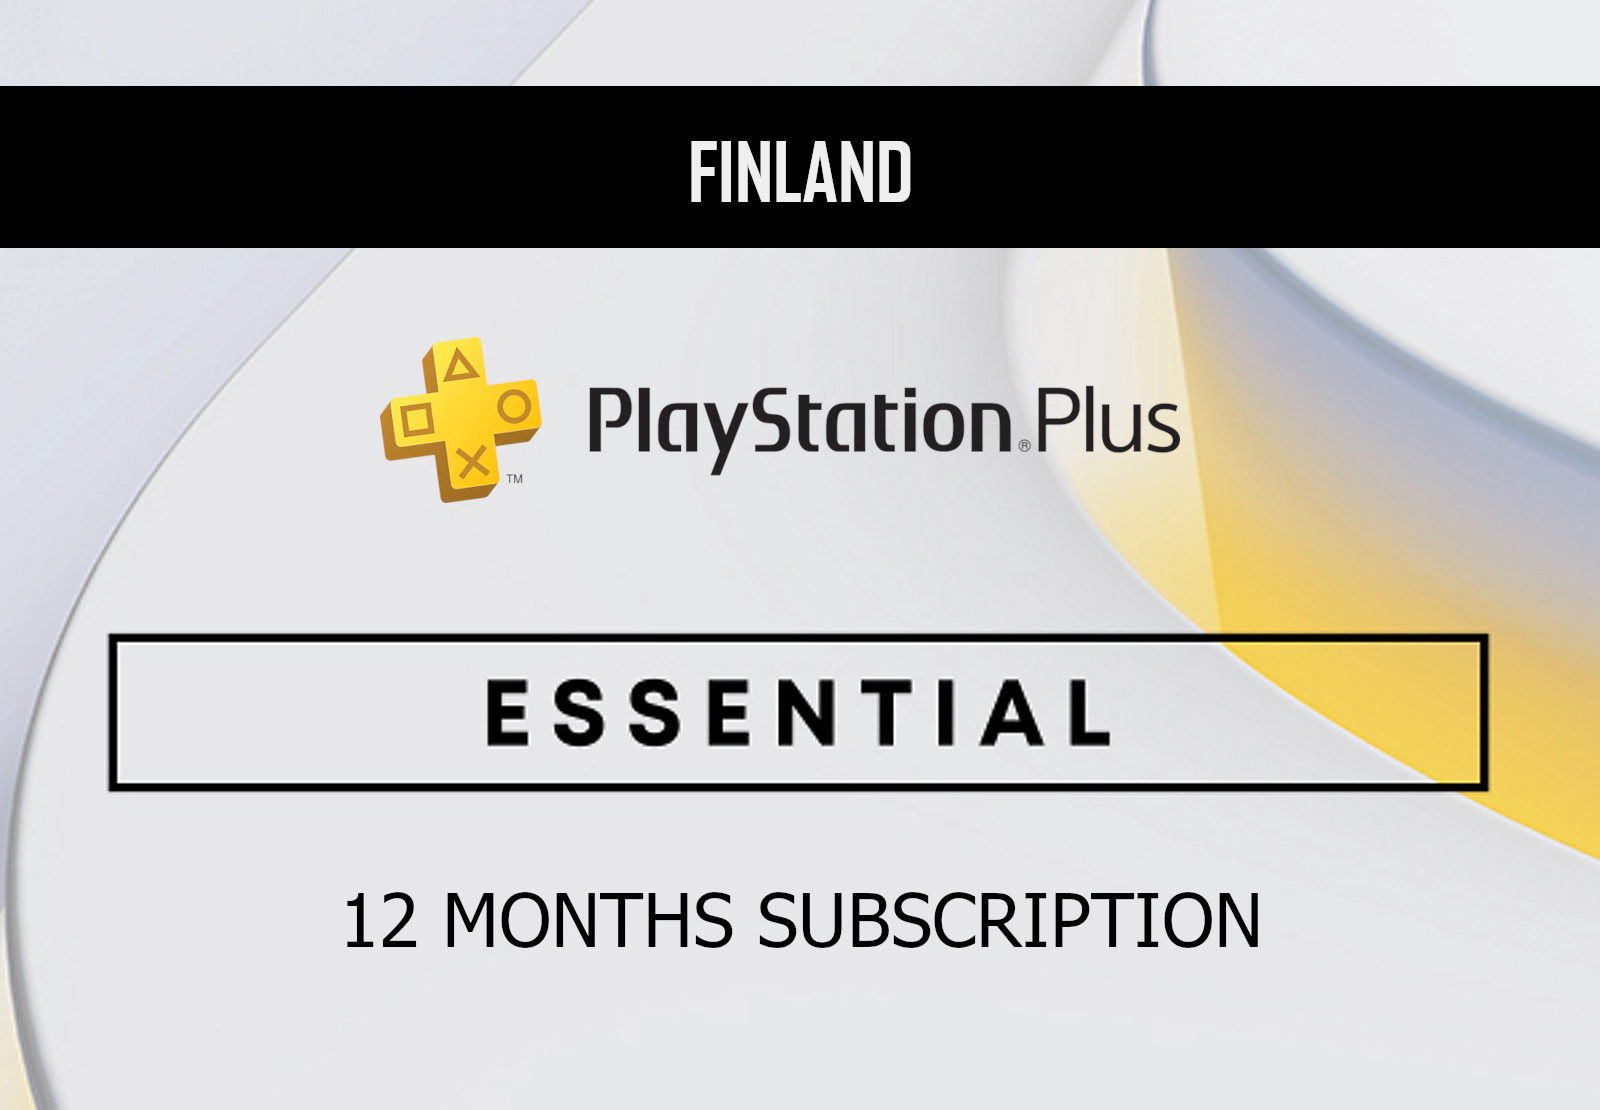 PlayStation Plus Essential 12 Months Subscription FI